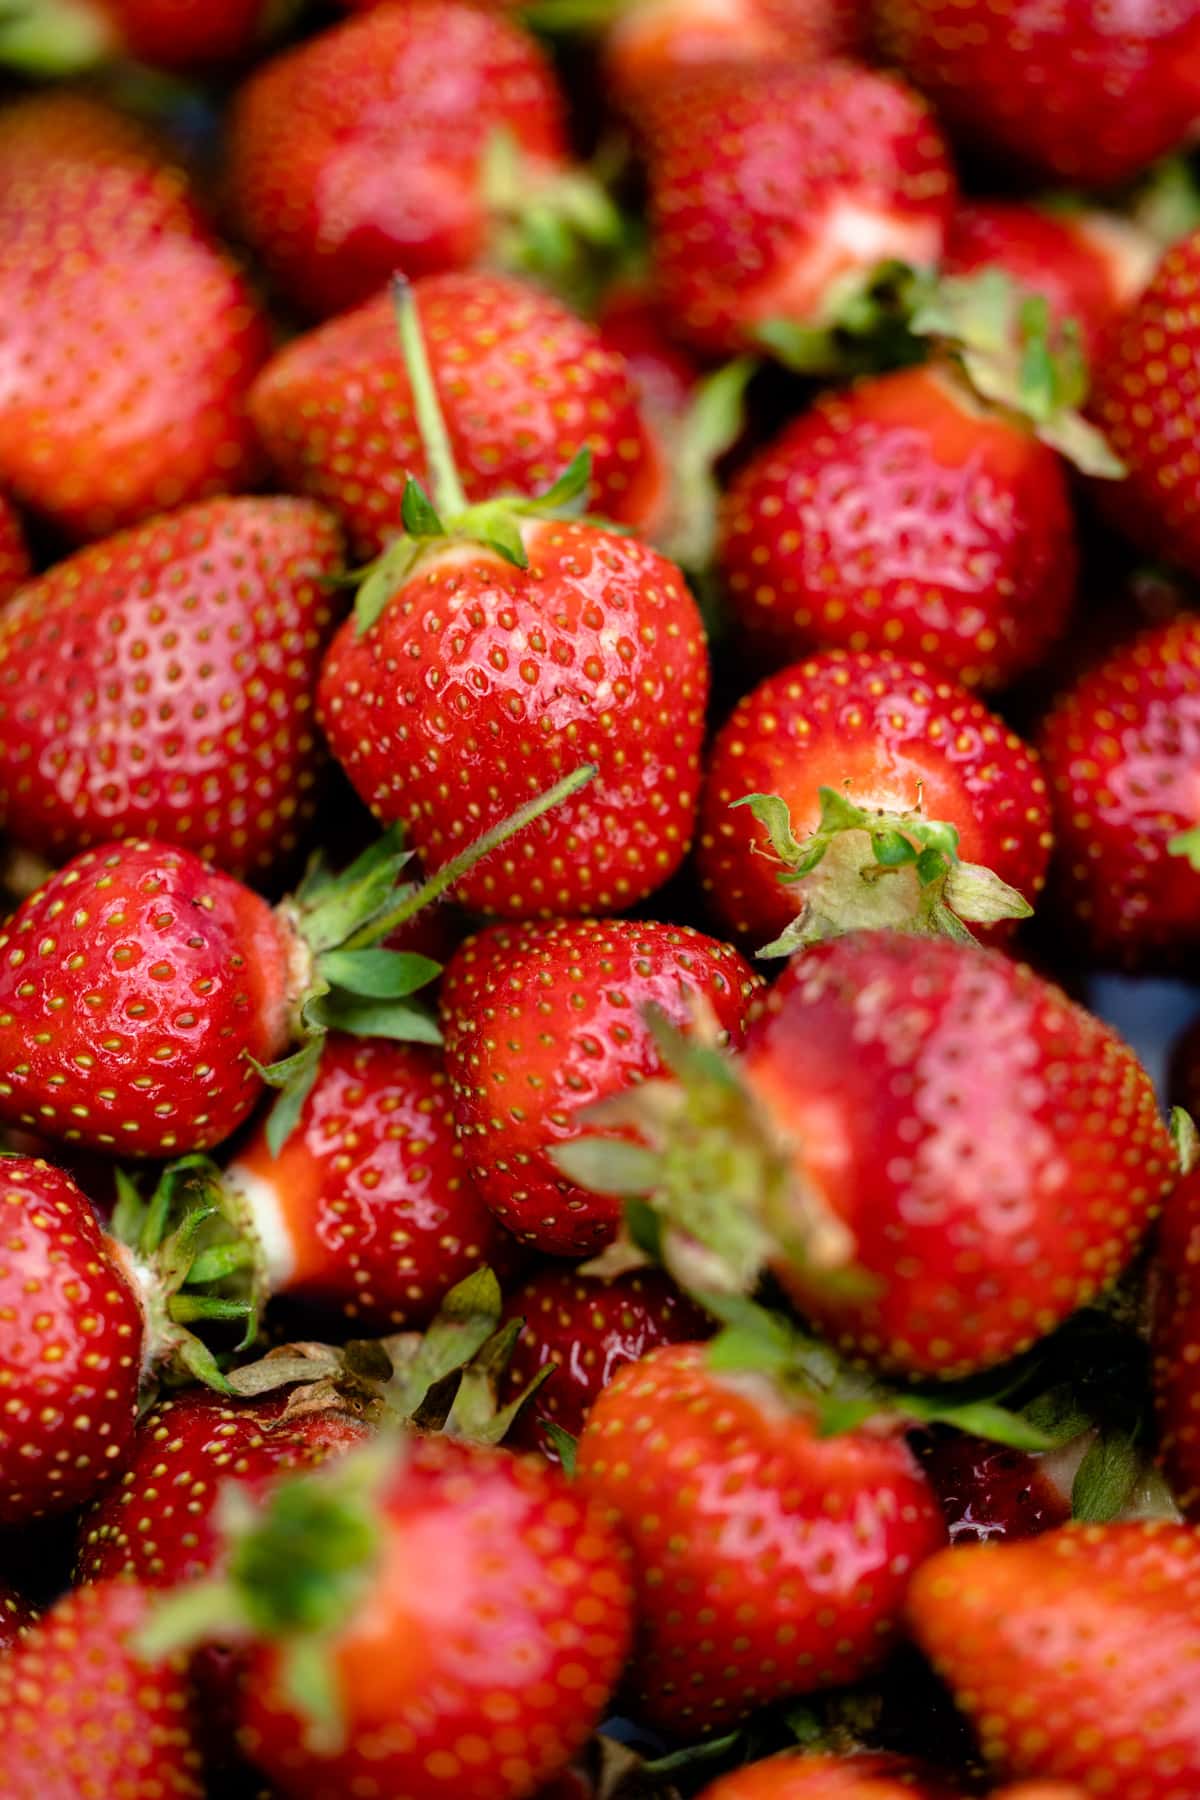 A bunch of strawberries.